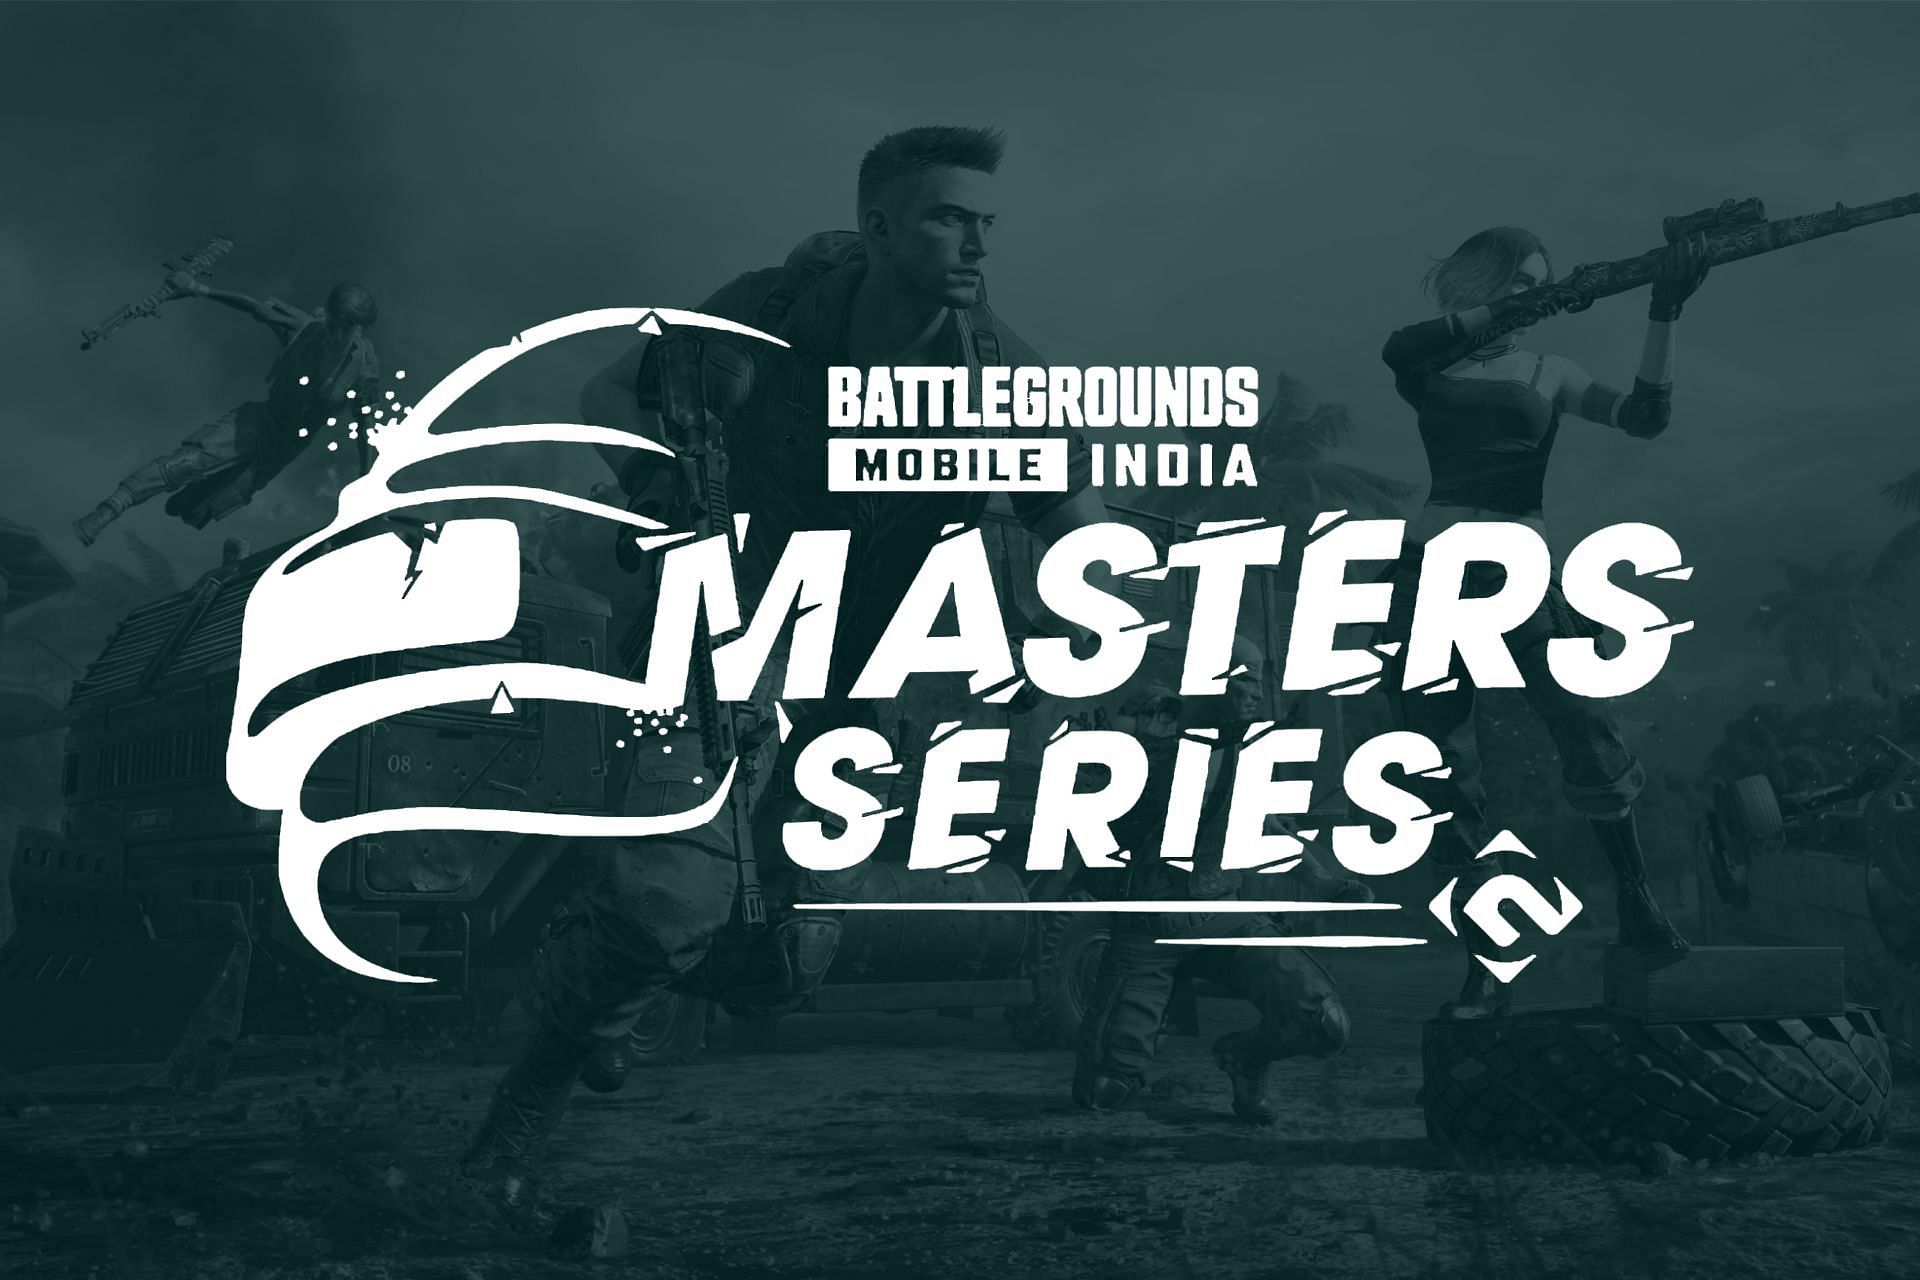 Nodwin Gaming BGMI Masters Series to also be livestreamed on Loco and Glance Live, date and schedule revealed